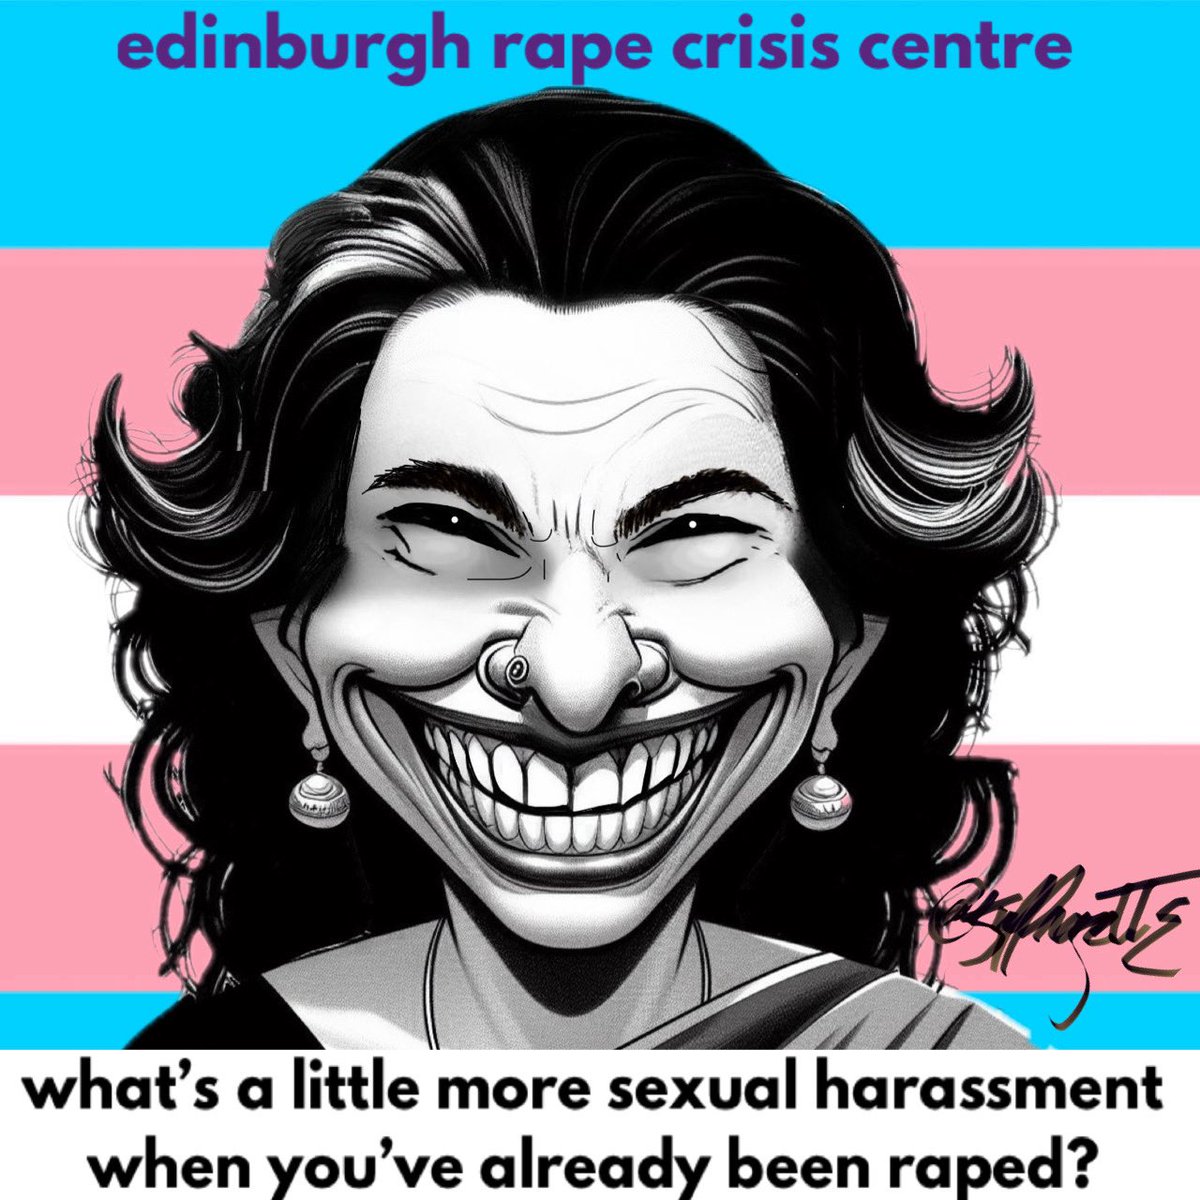 Thought I would try to help the Edinburgh Rape Crisis Centre with their “rebranding” today. #ERCC #MridulWadhwa